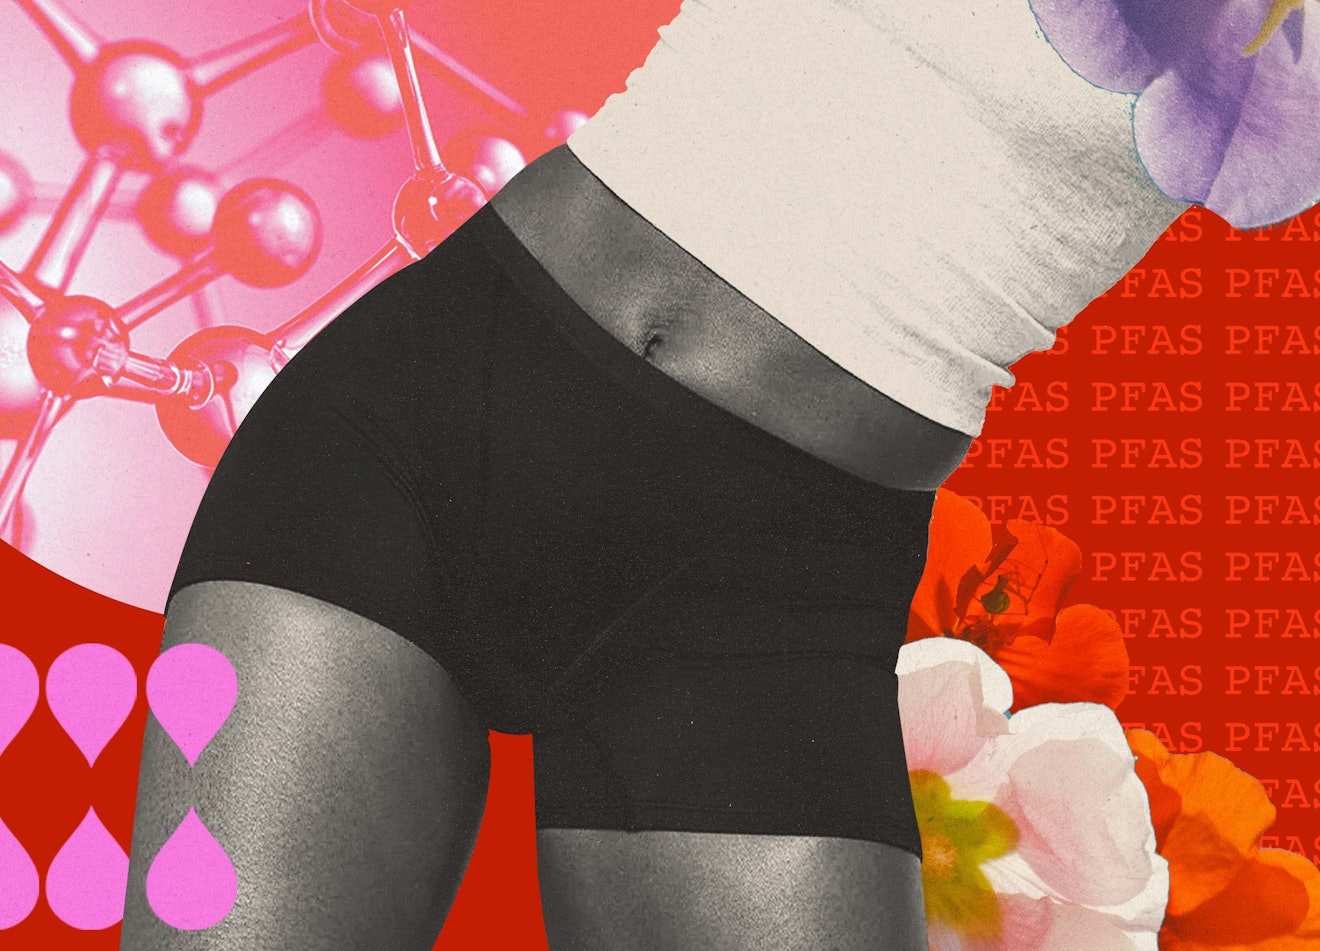 Thinx settles lawsuit over period underwear marketing: What to